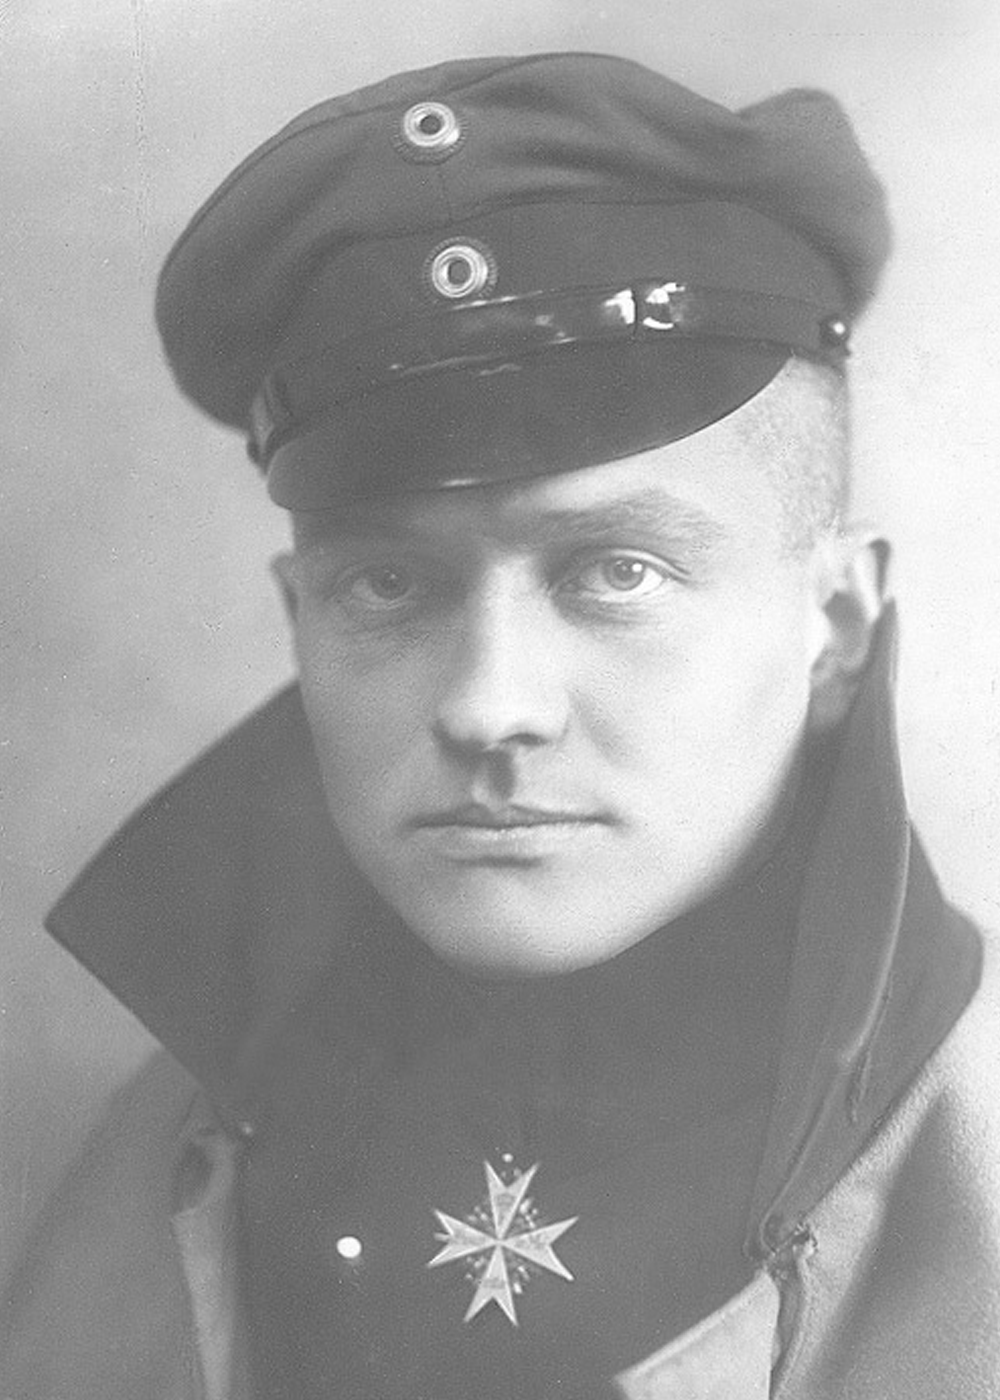 The glorified reputation of Manfred von Richthofen, the so-called Red Baron, obscures some of the disturbing realities of his accomplishments during World War I, said an Illinois history professor. (Wikipedia public domain image.) 